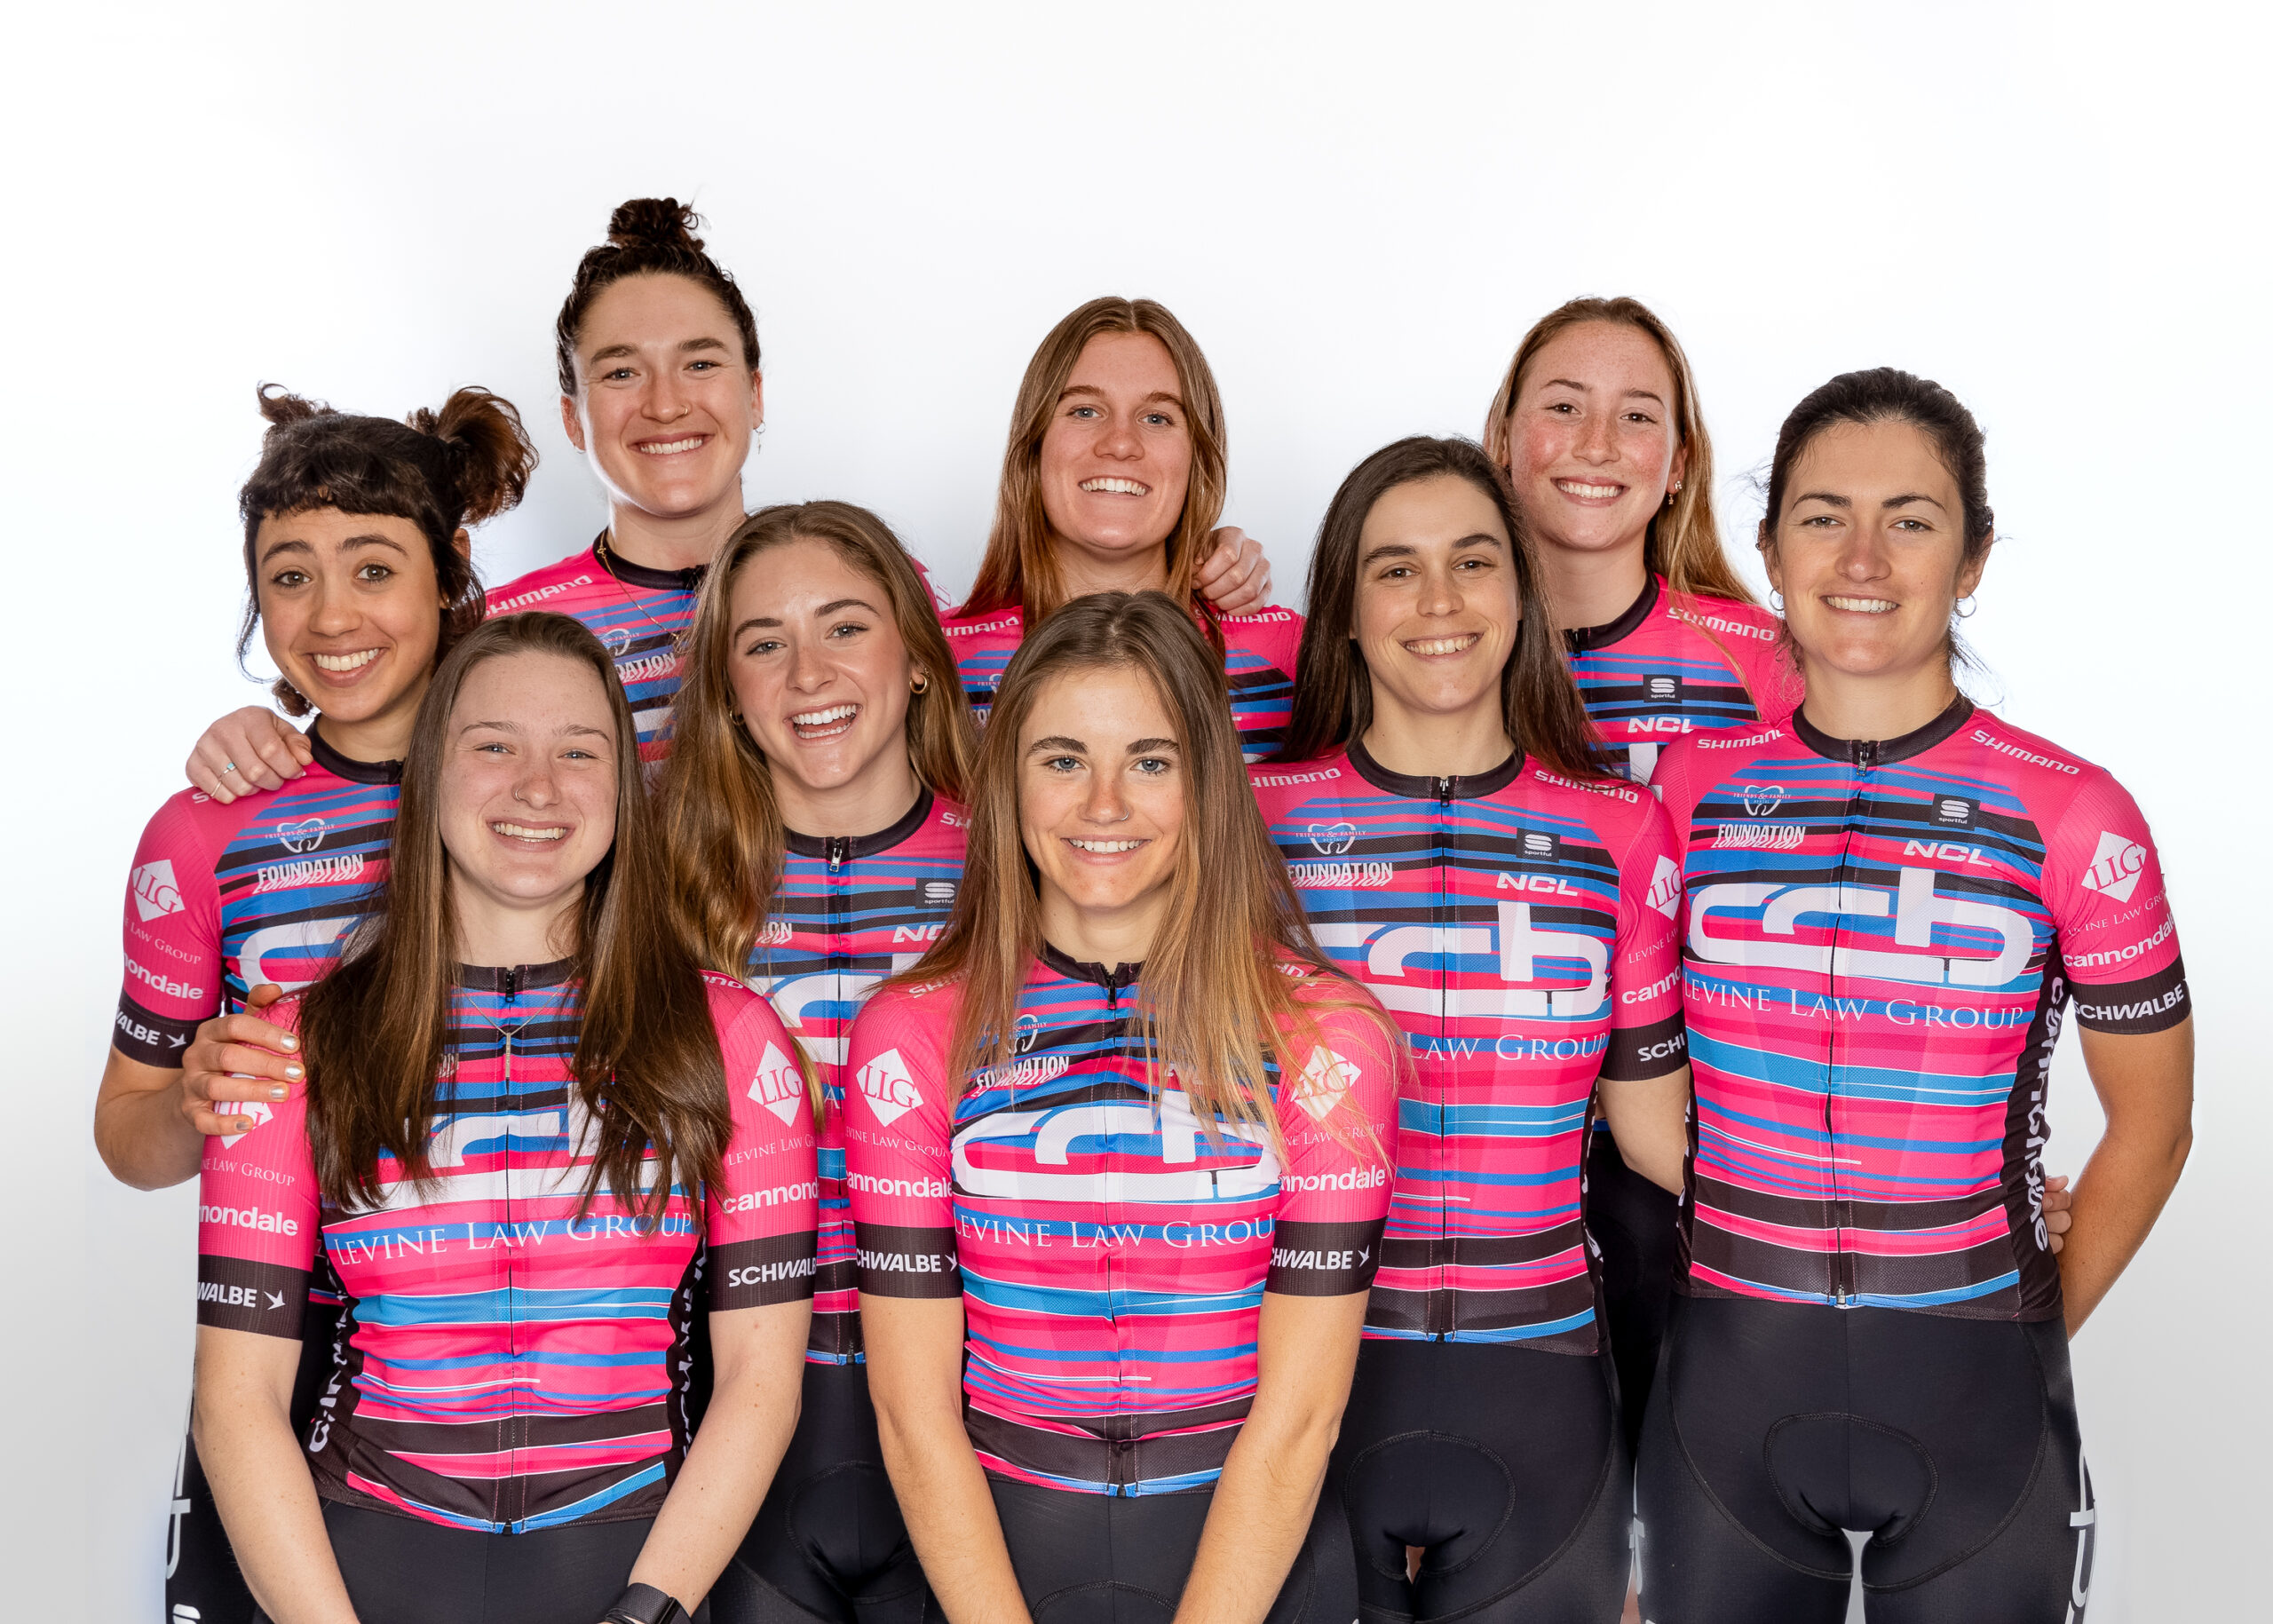 CCB p/b Levine Law Group Women’s Cycling